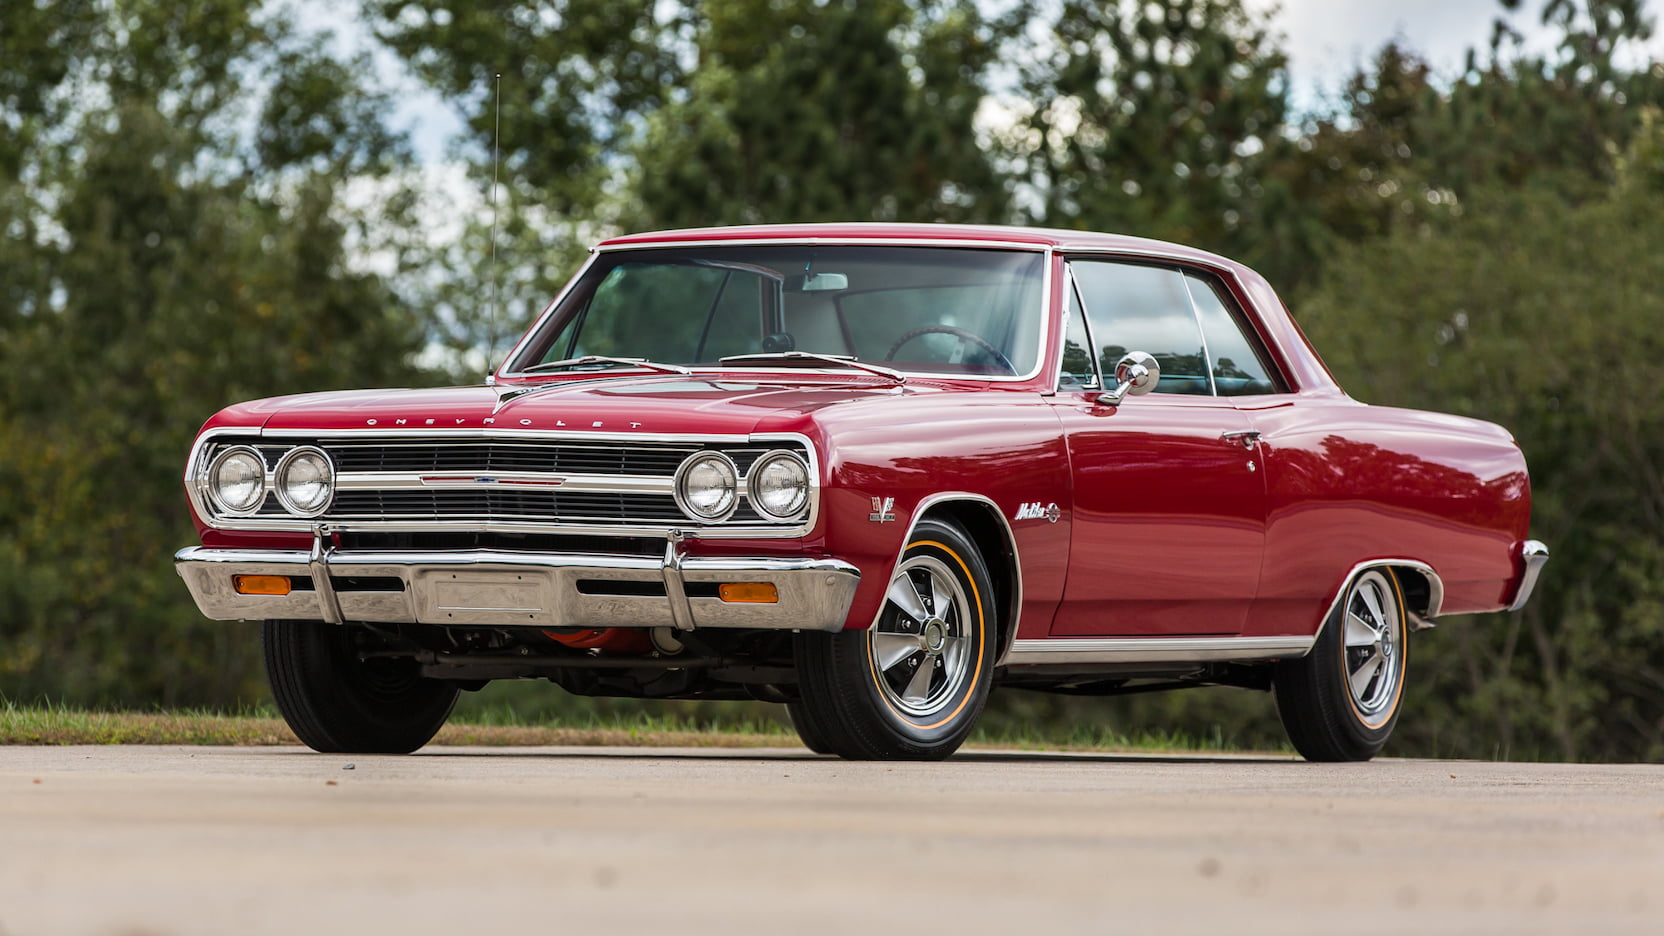 The hottest Chevy muscle cars to buy that aren’t Camaros